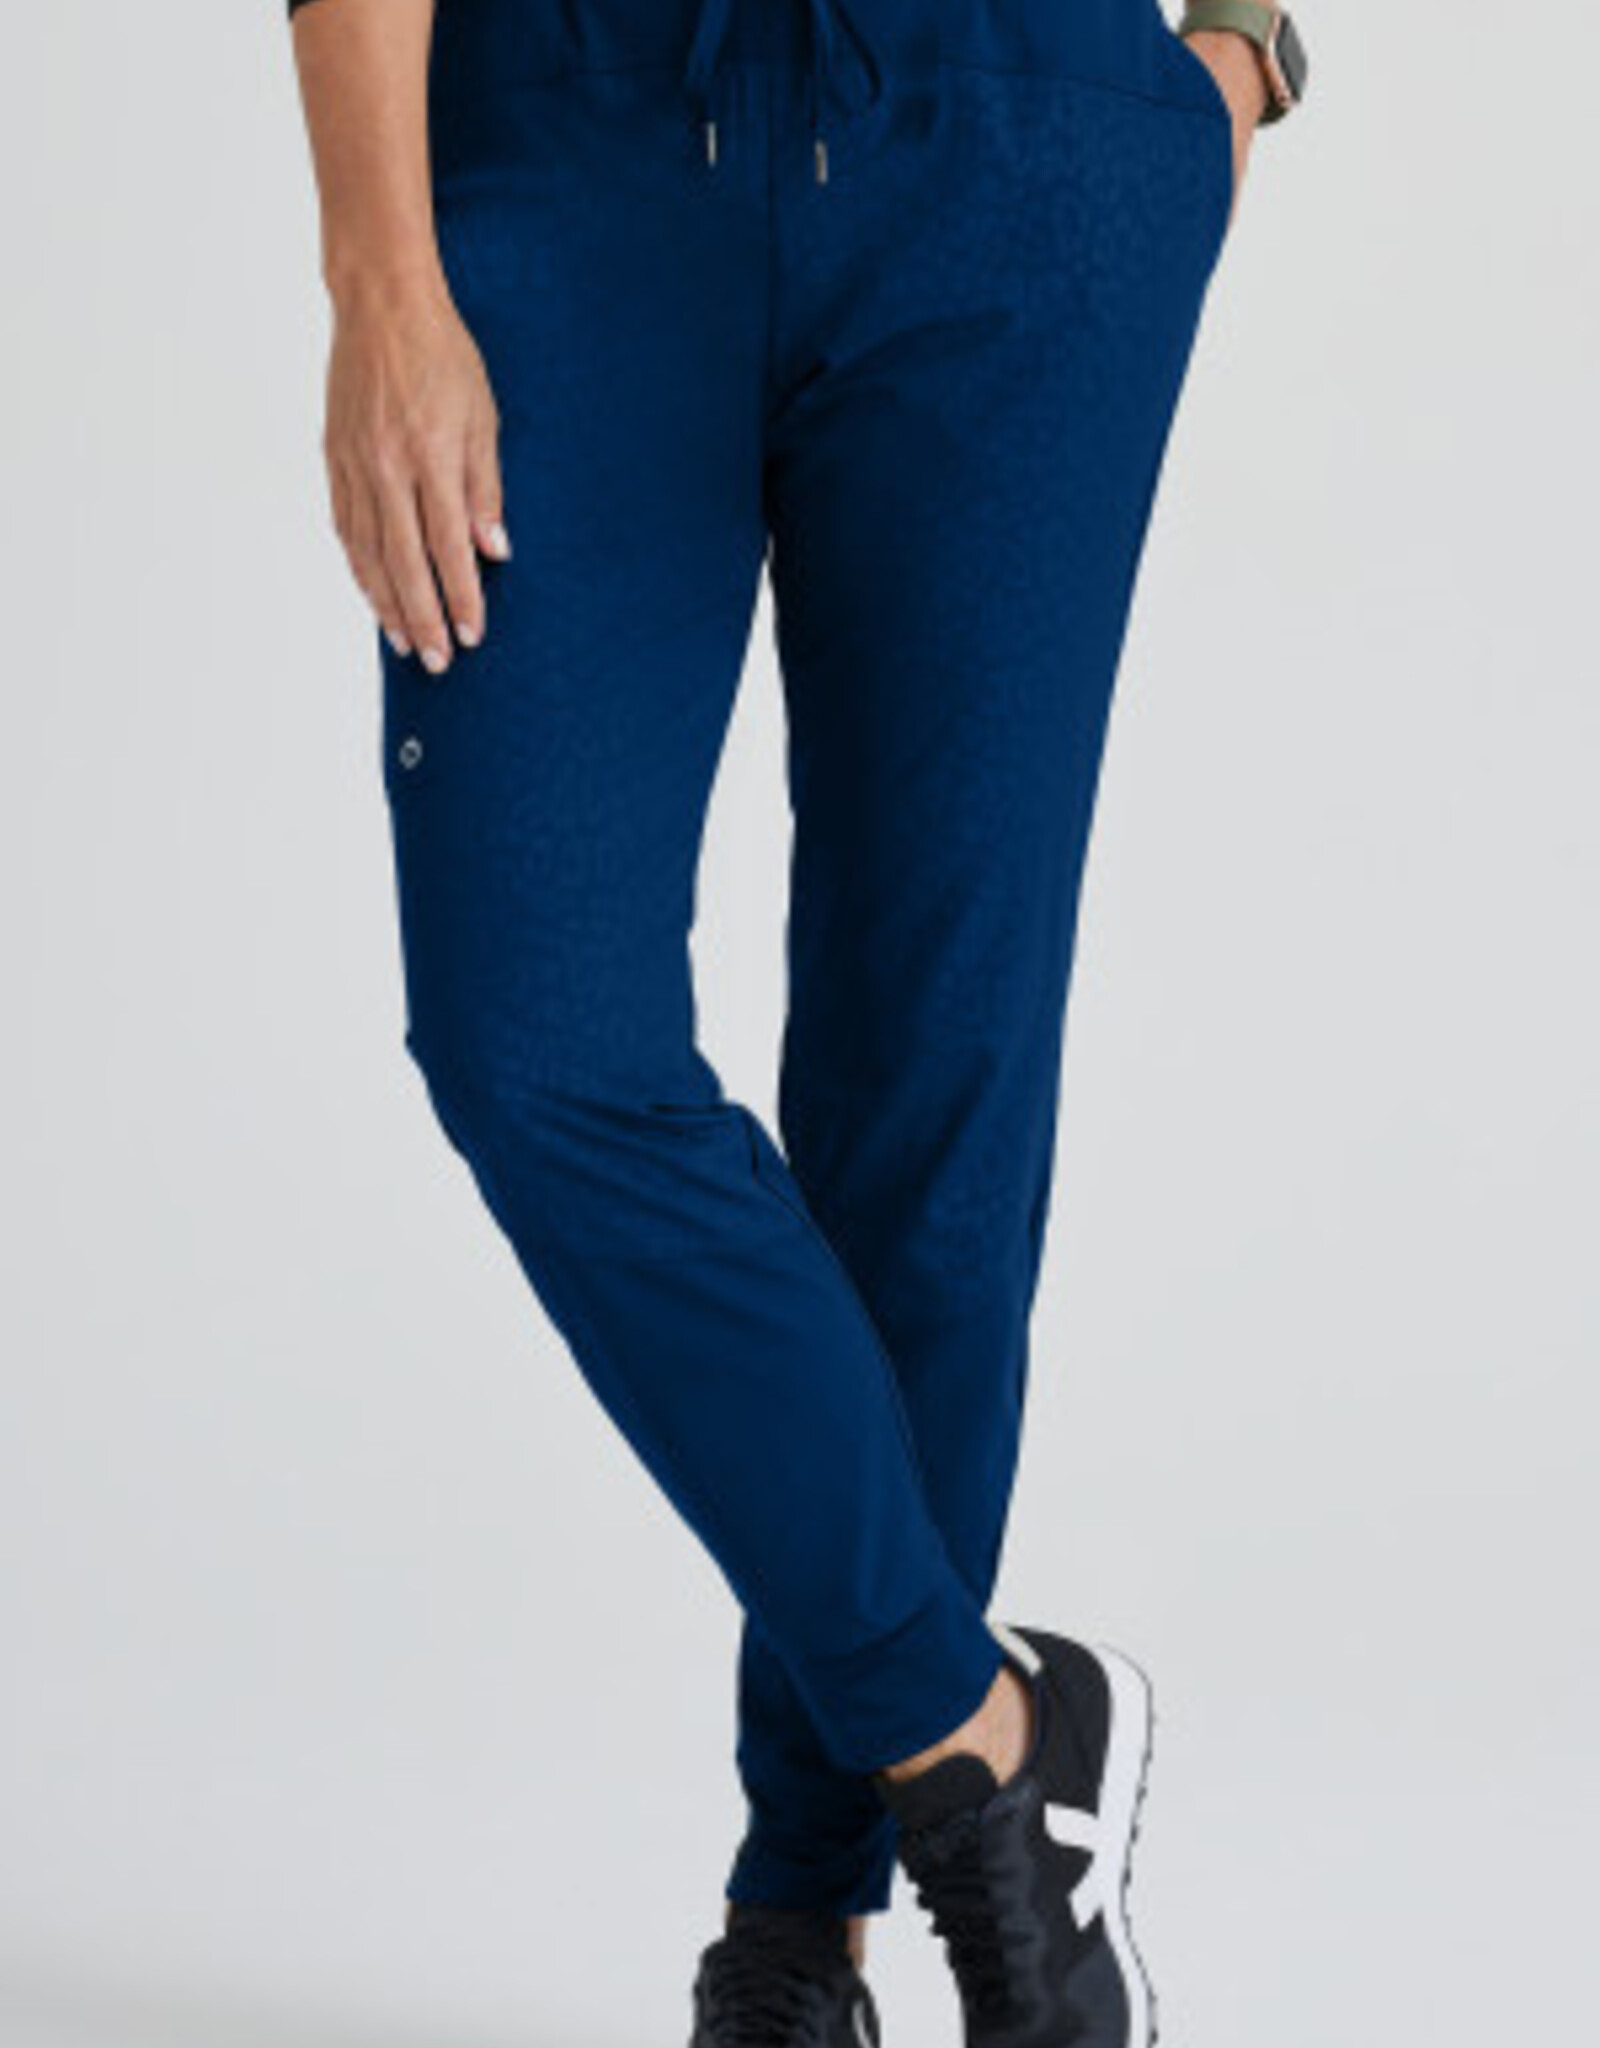 Barco One Women's "Boost" Jogger Pant (Tall)